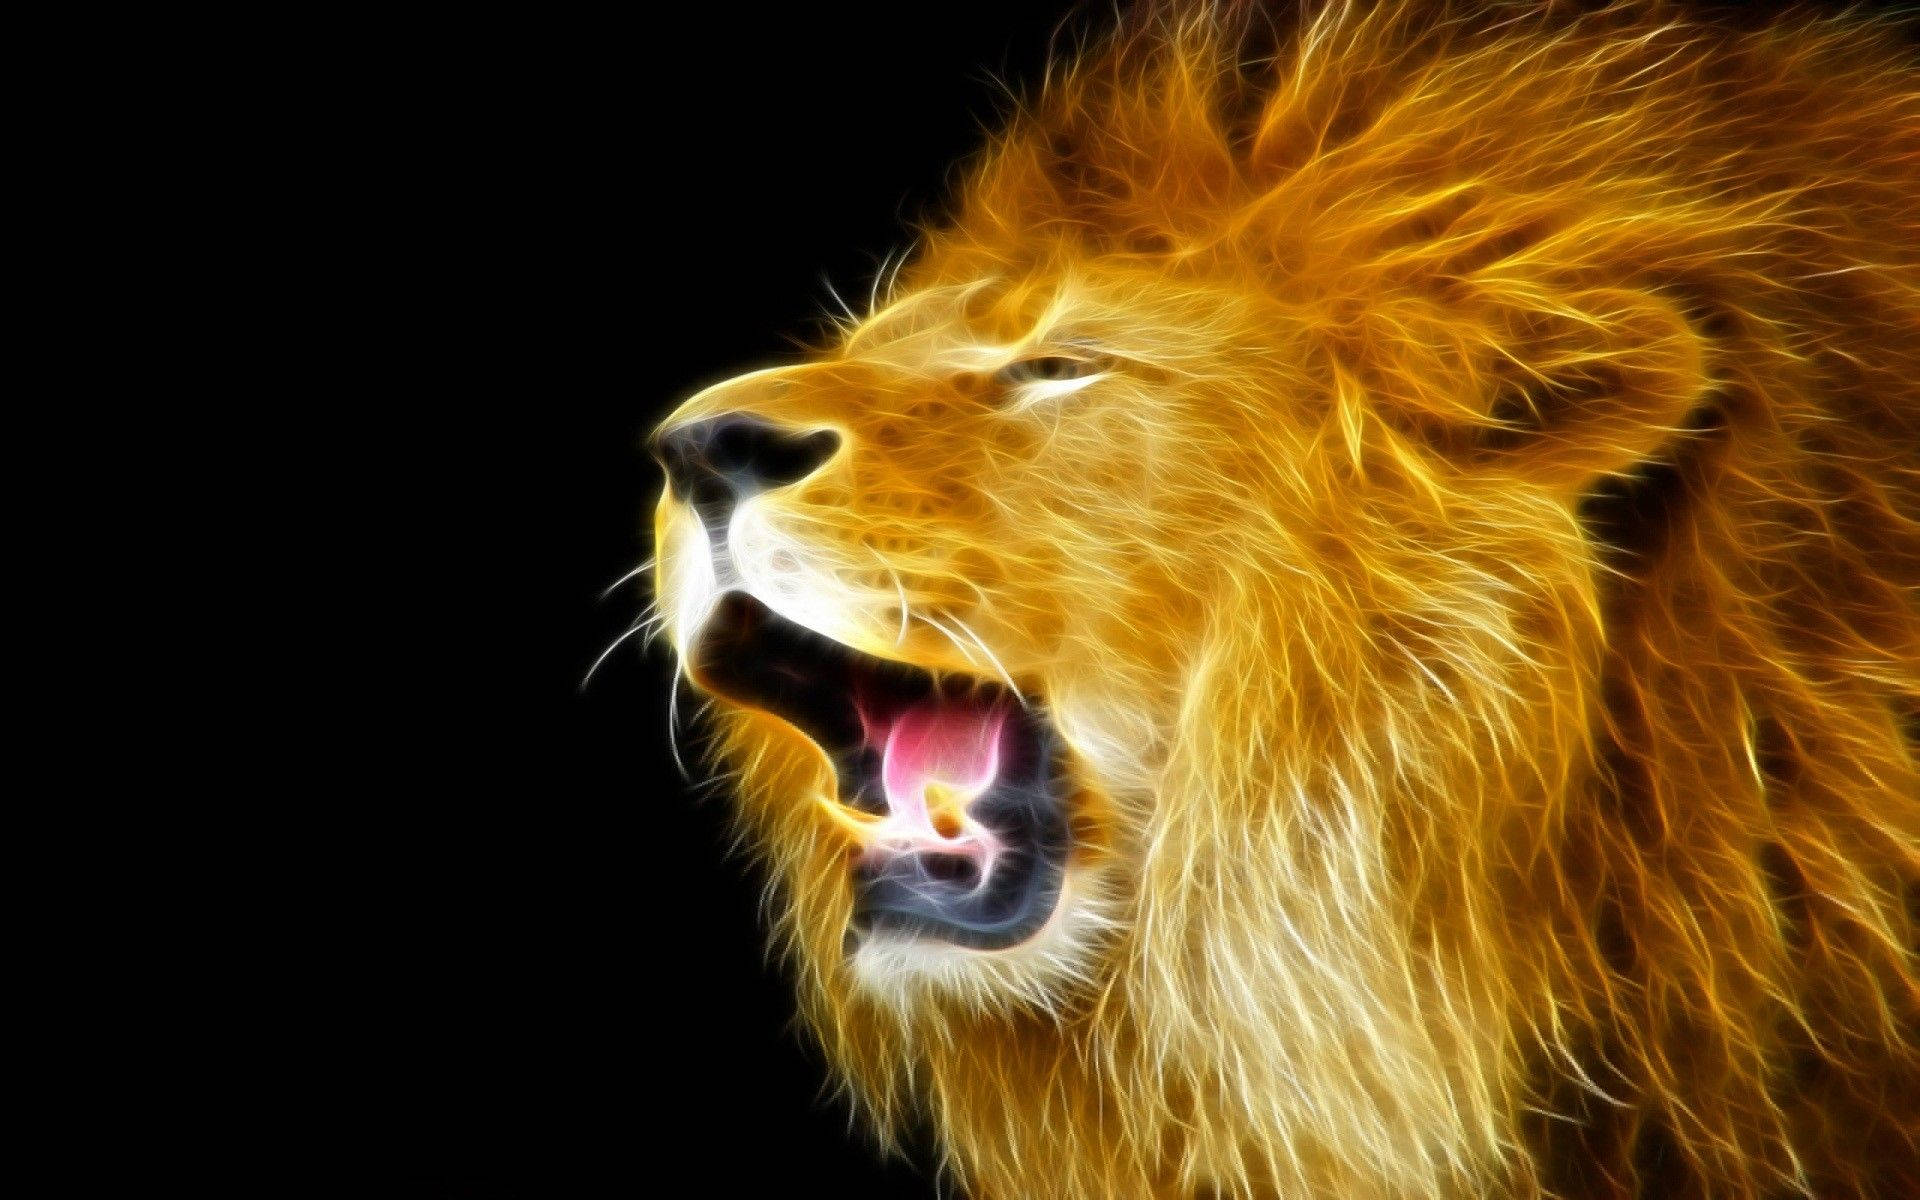 3d Lion Display Features Roaring Lion Background